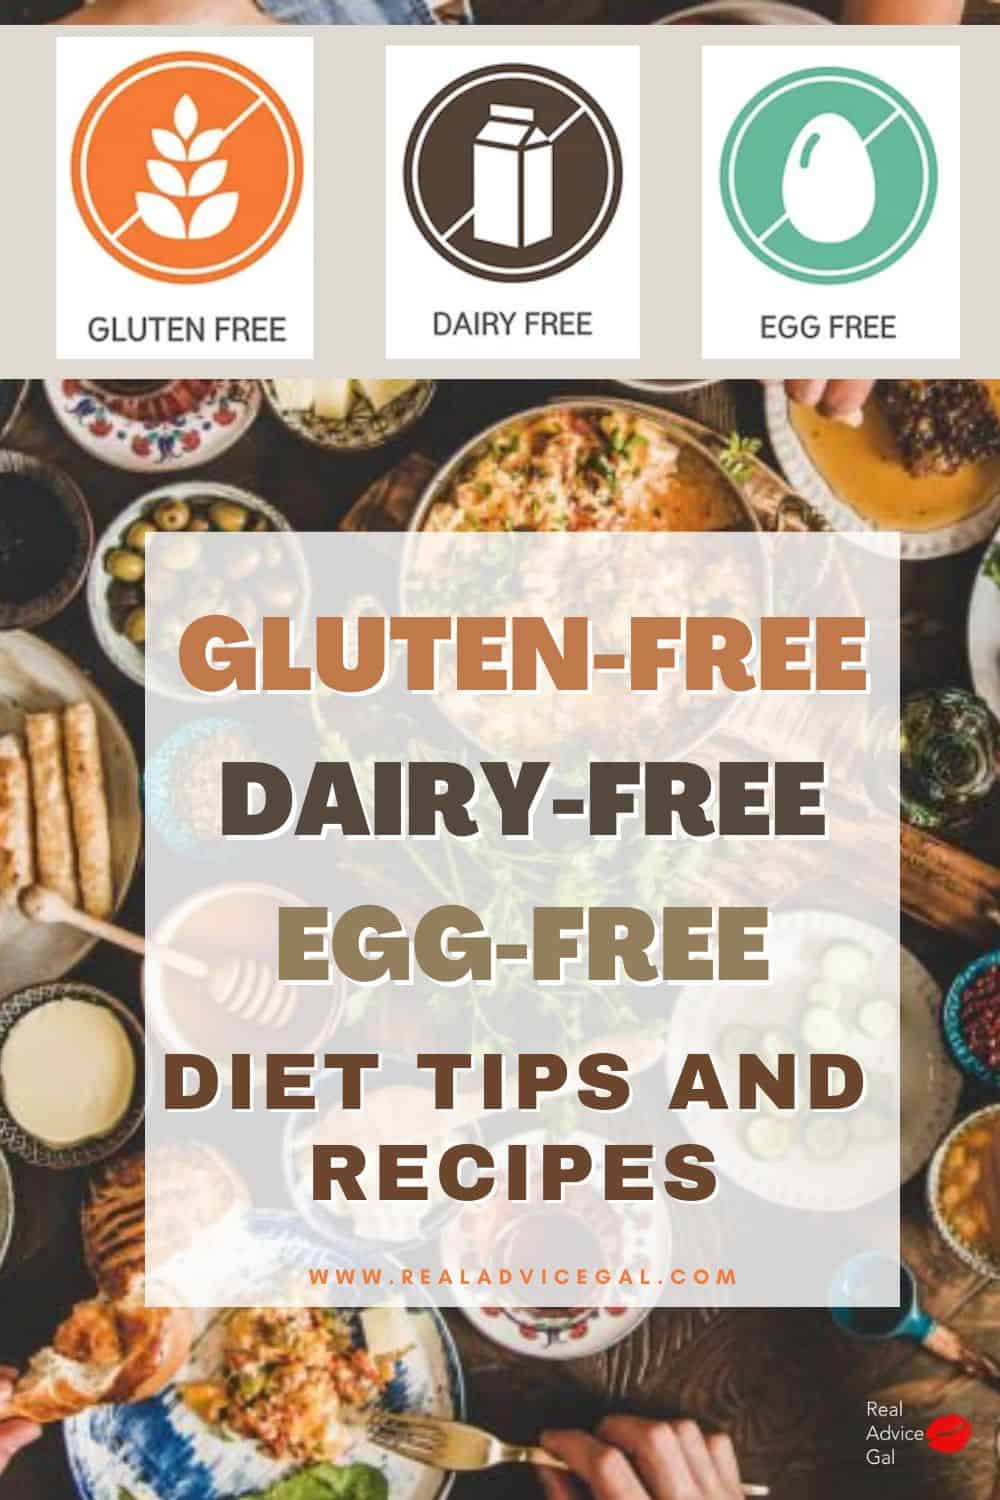 Gluten Free and Dairy Free Recipes